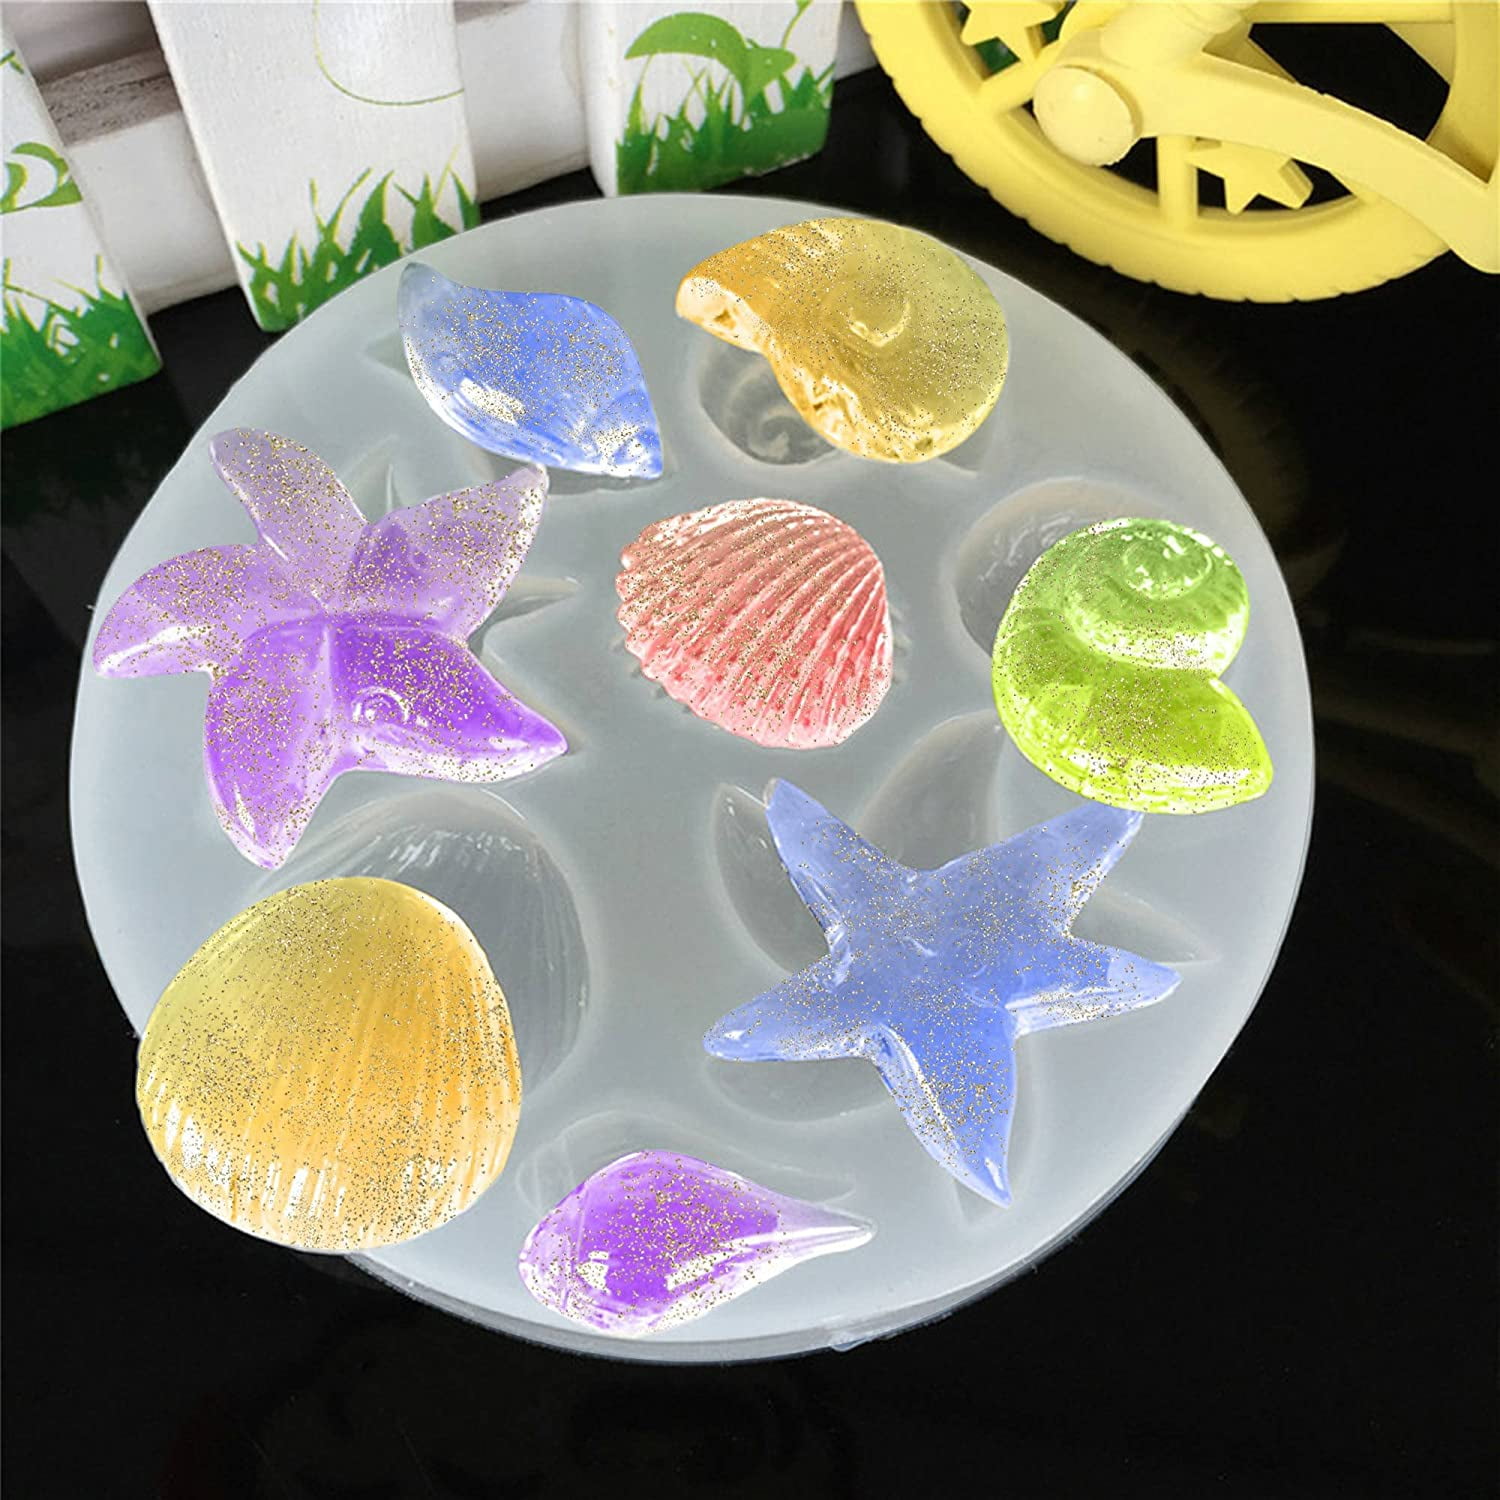 Silicone Mold Making Kit Liquid Silicone Rubber Non-Toxic Translucent Clear  Mold Making Silicone-Mixing Ratio 1:1-Molding Silicone for Resin Molds,Silicone  Molds DIY Manual Making (N.W 20.2oz) 